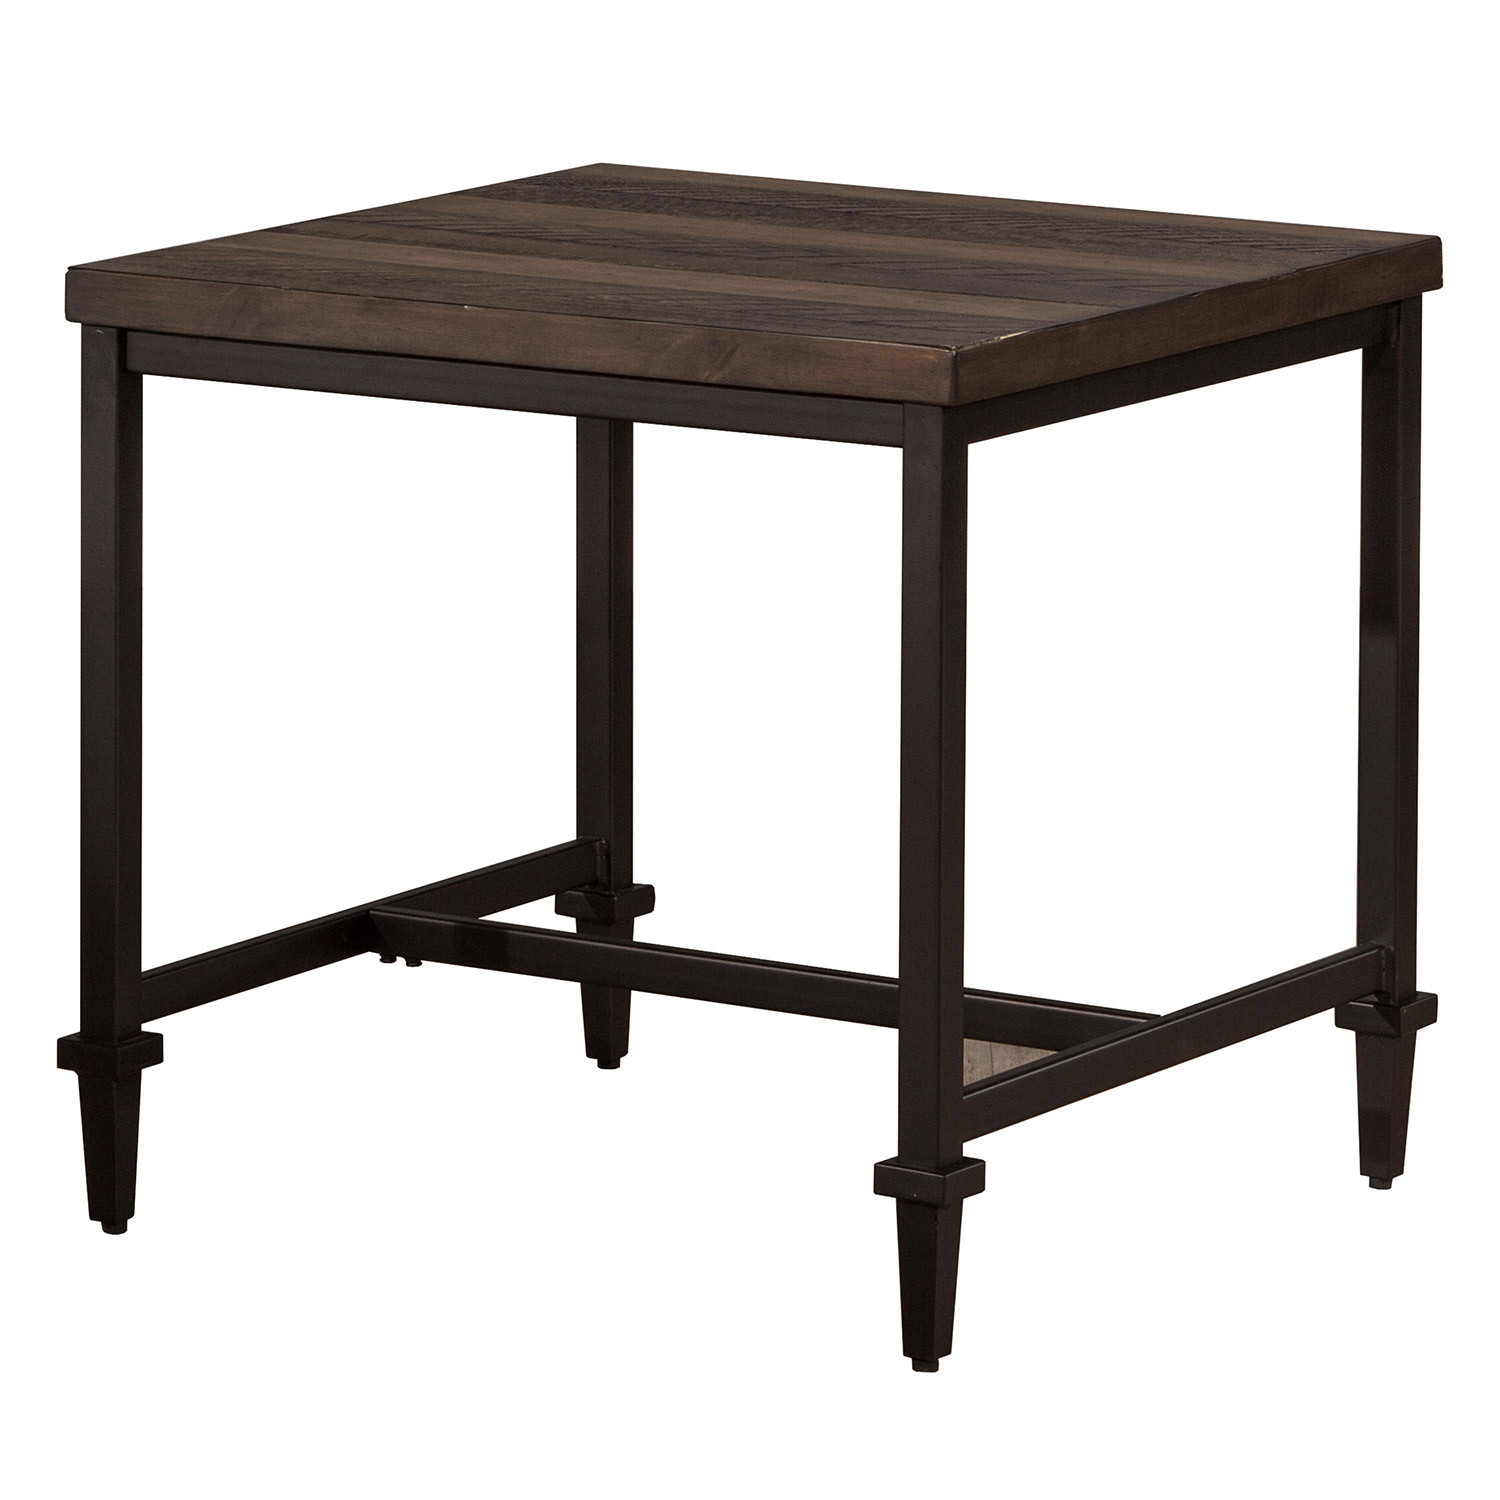 Hillsdale Trevino End Table - Walnut/Brown